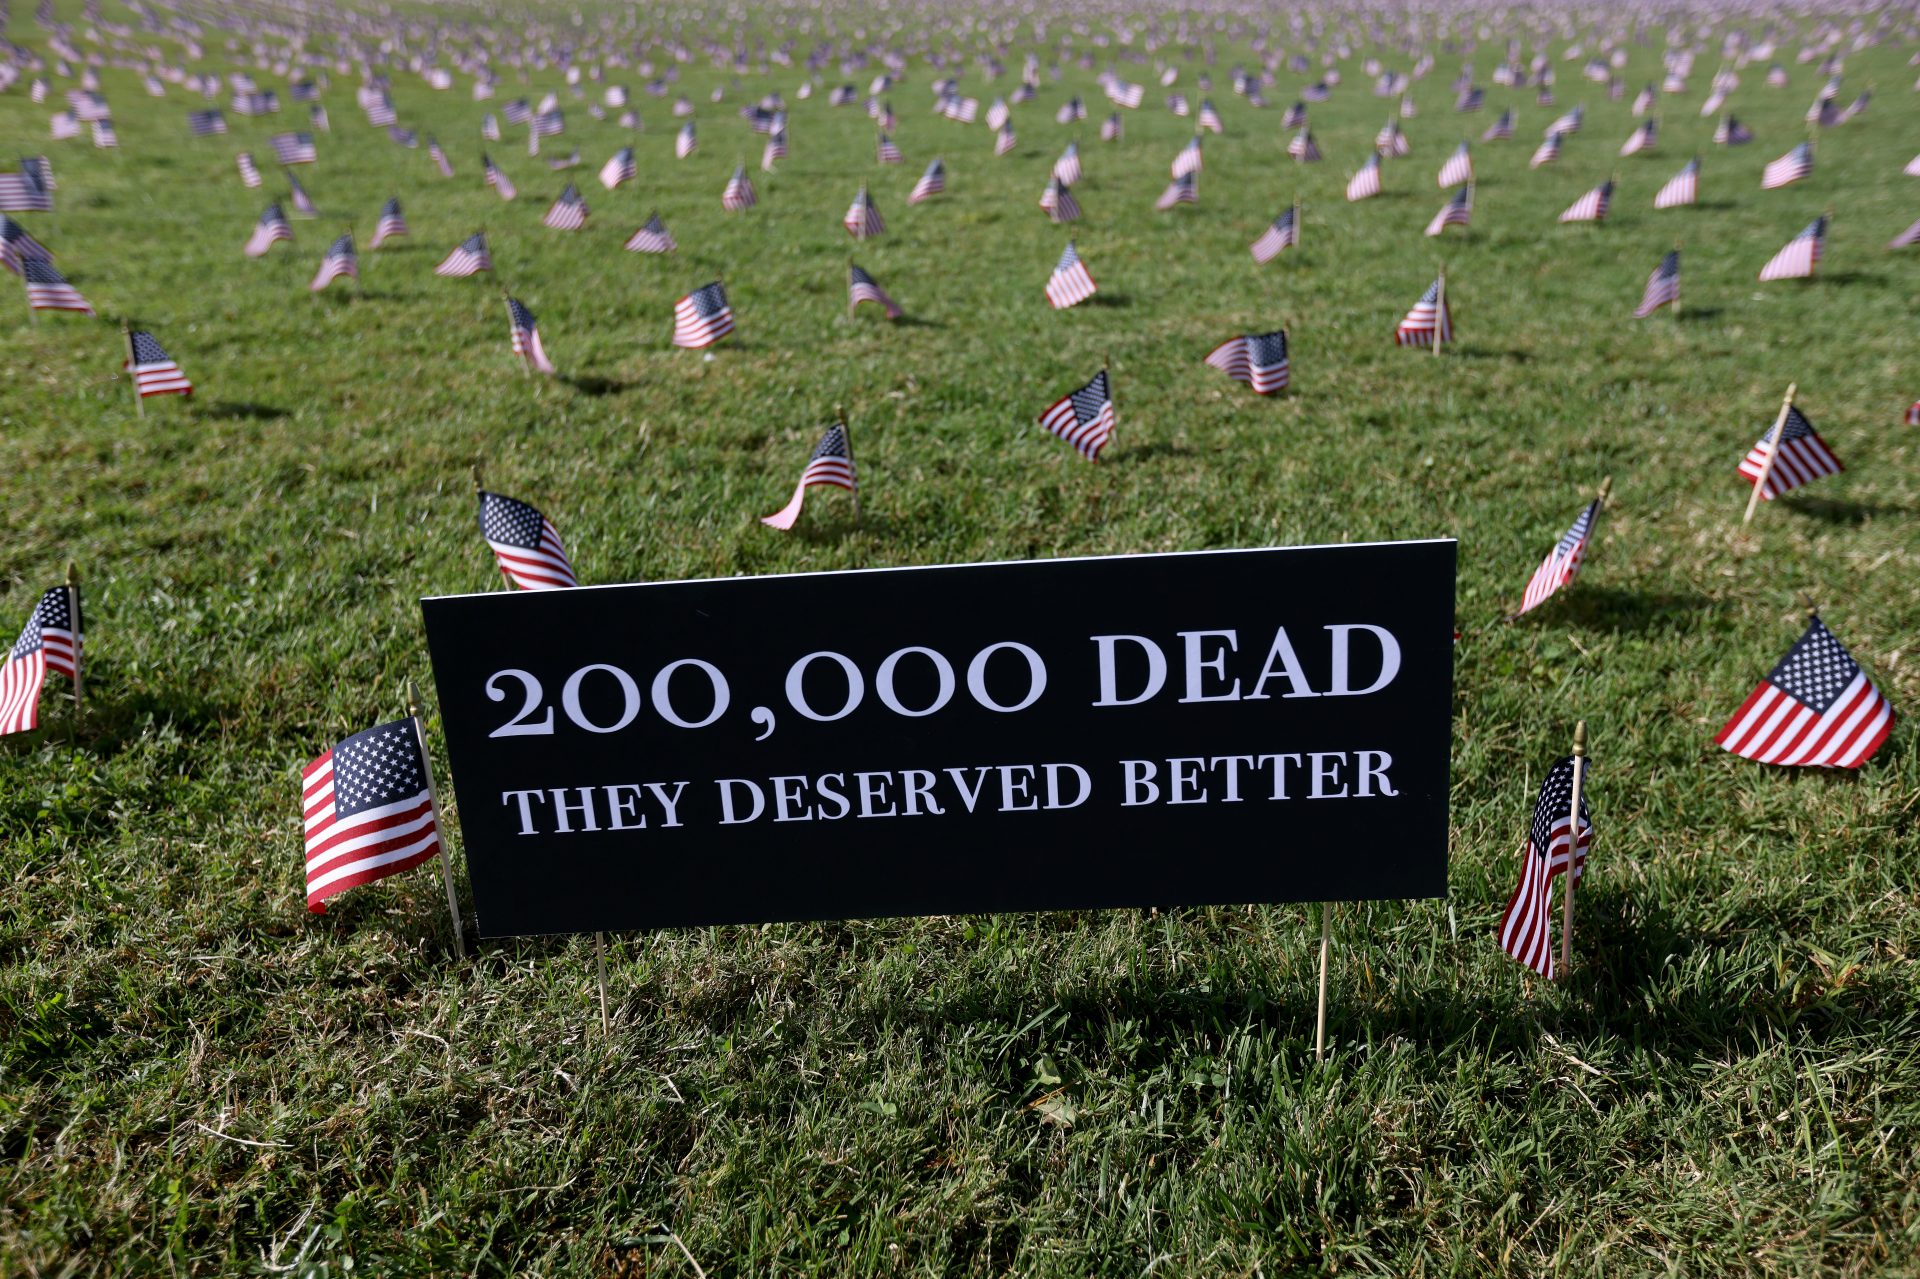 Thousands of U.S. flags were planted on the National Mall in Washington, D.C., this September as part of the COVID Memorial Project installation.